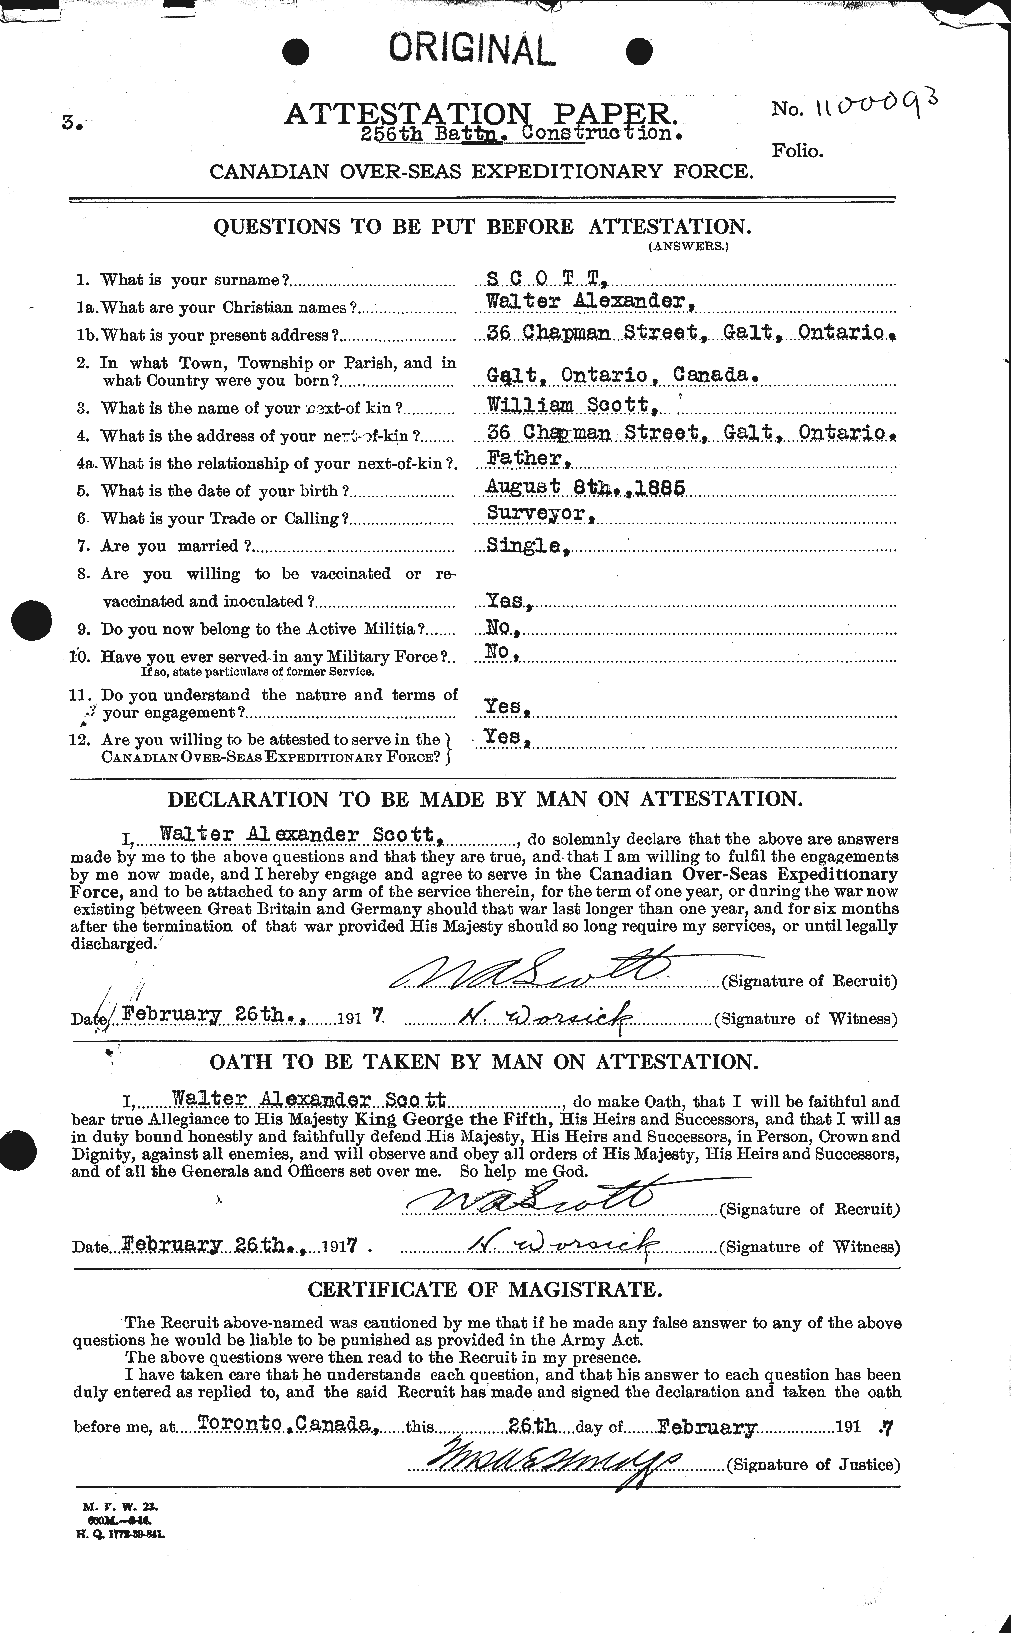 Personnel Records of the First World War - CEF 088005a